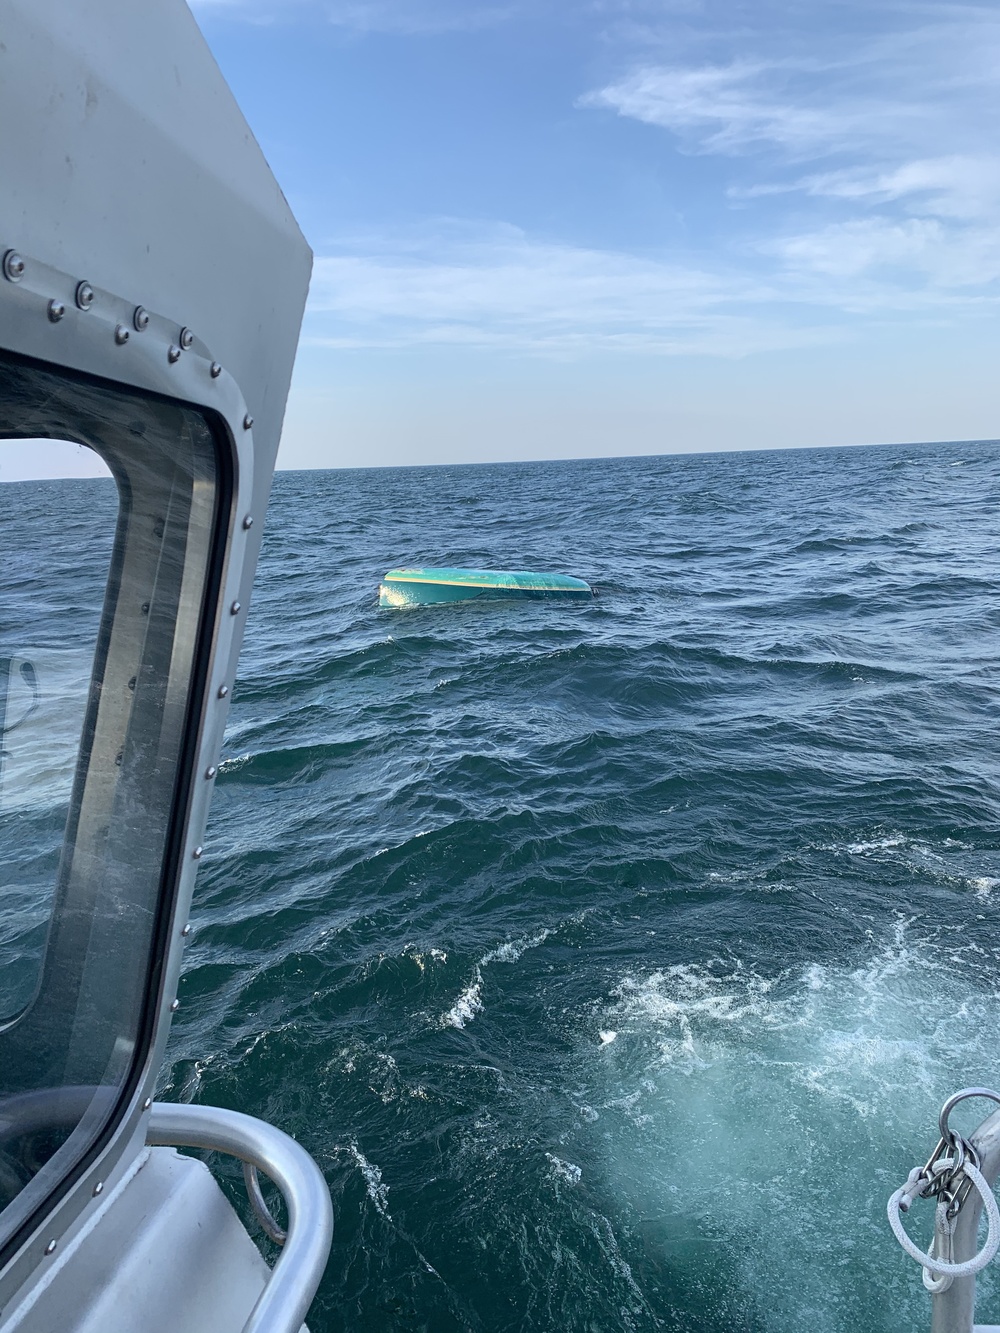 Coast Guard rescues 2 from capsized vessel